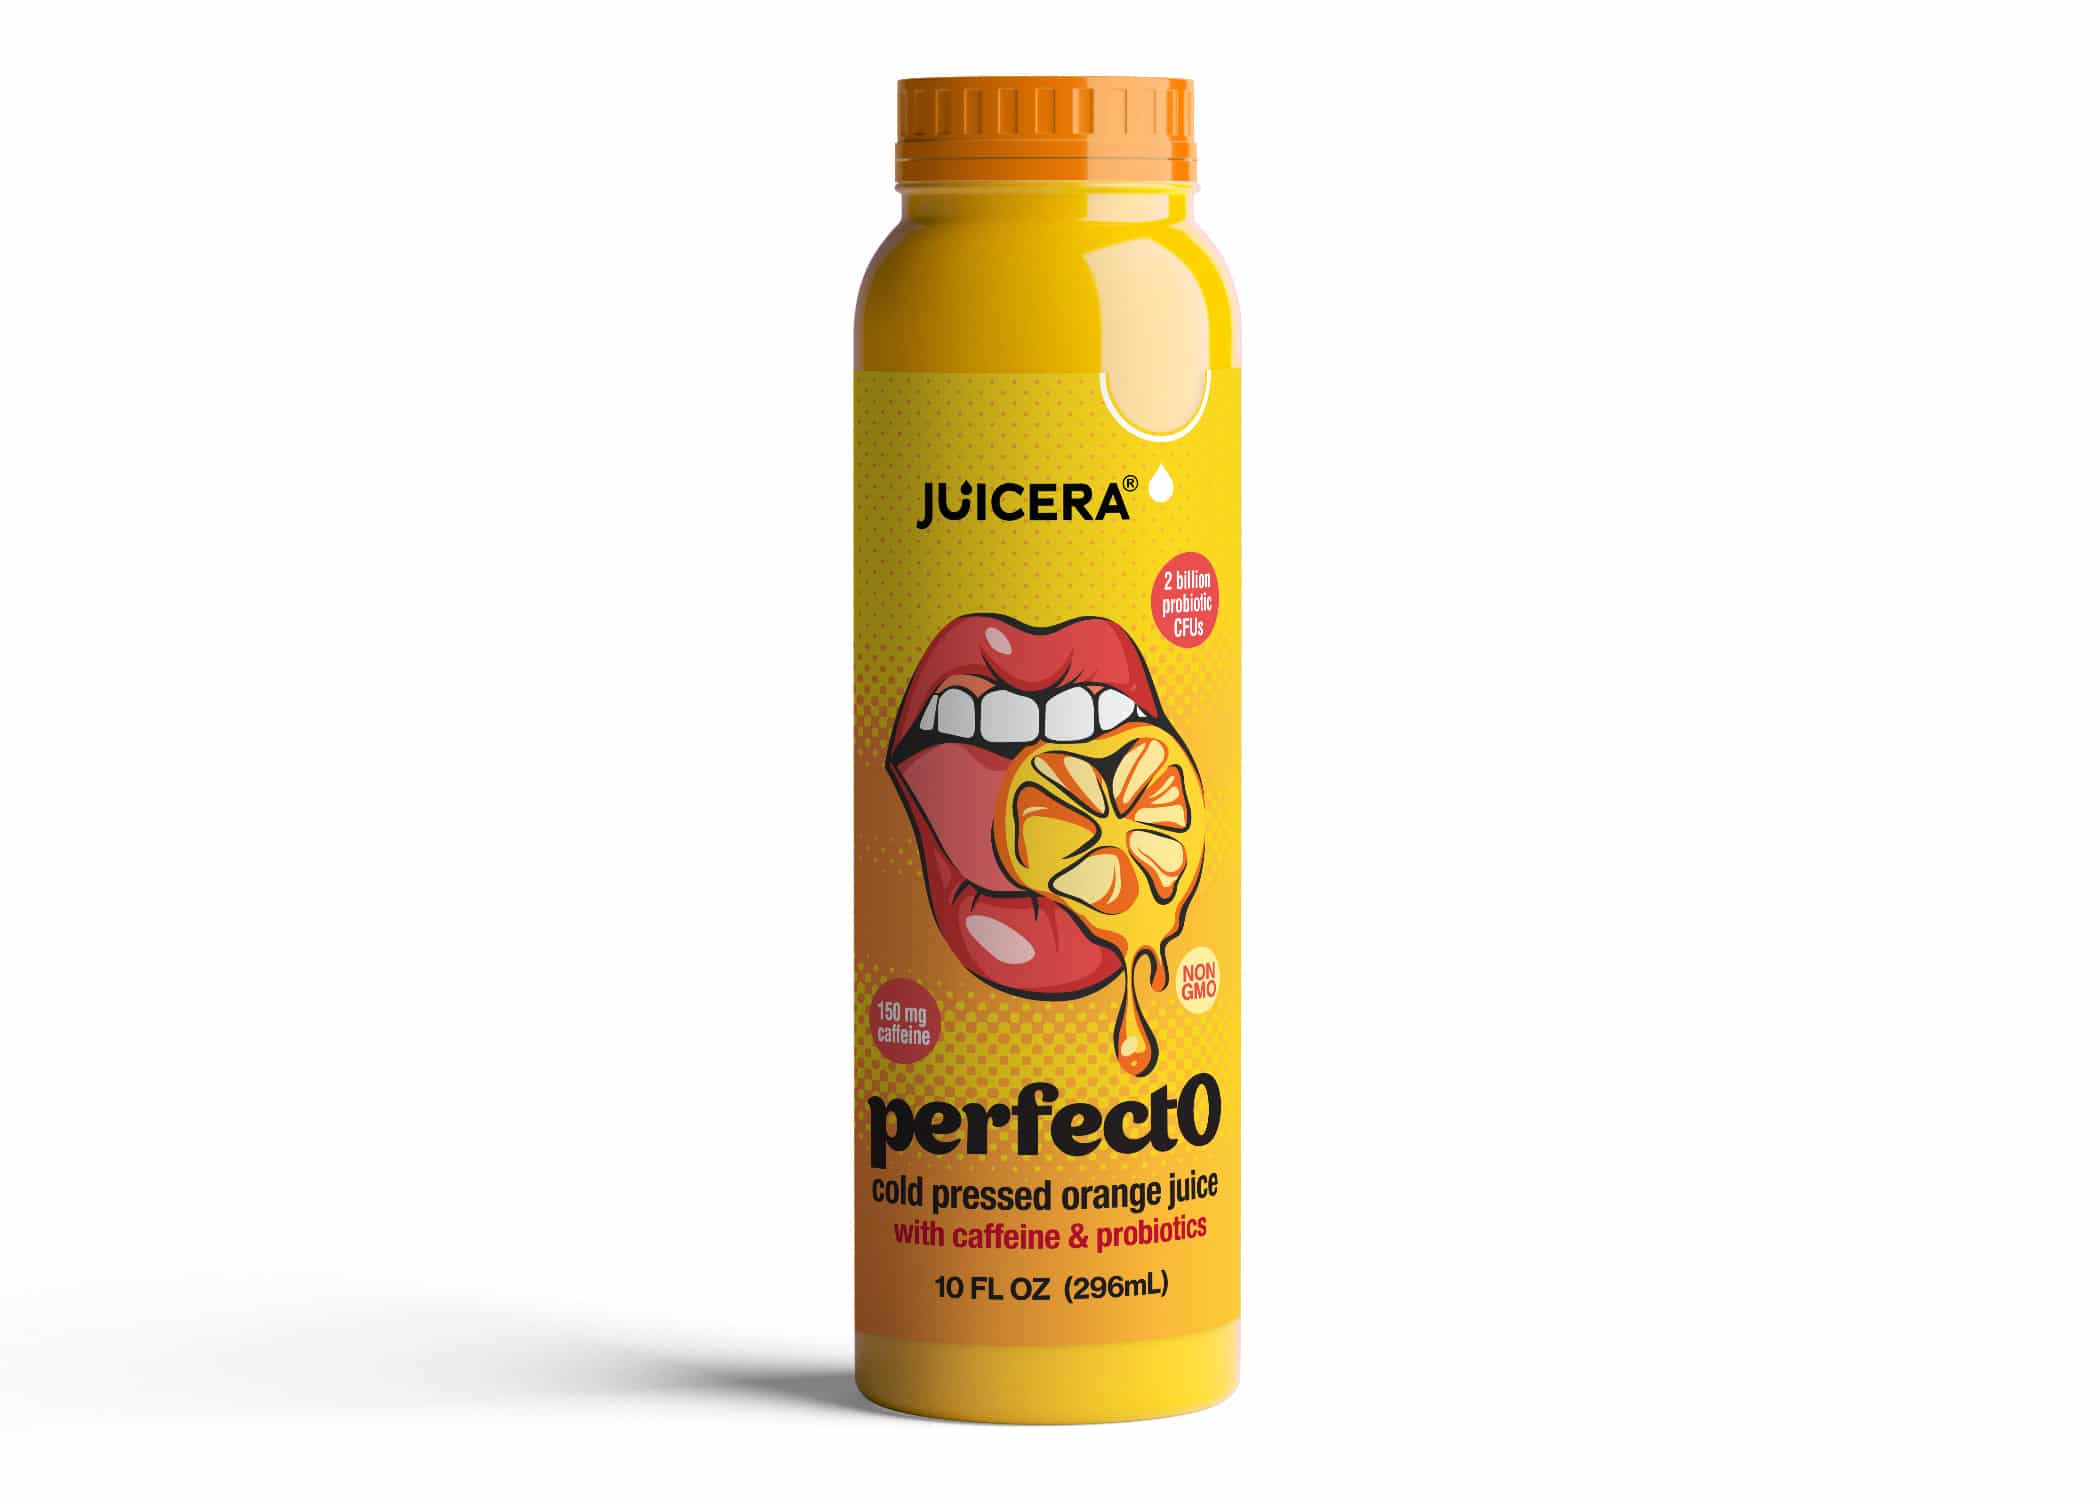 Juicera PerfectO energy drink package design Pop art bottle in bright yellow with open mouth with tongue sticking out on the label.